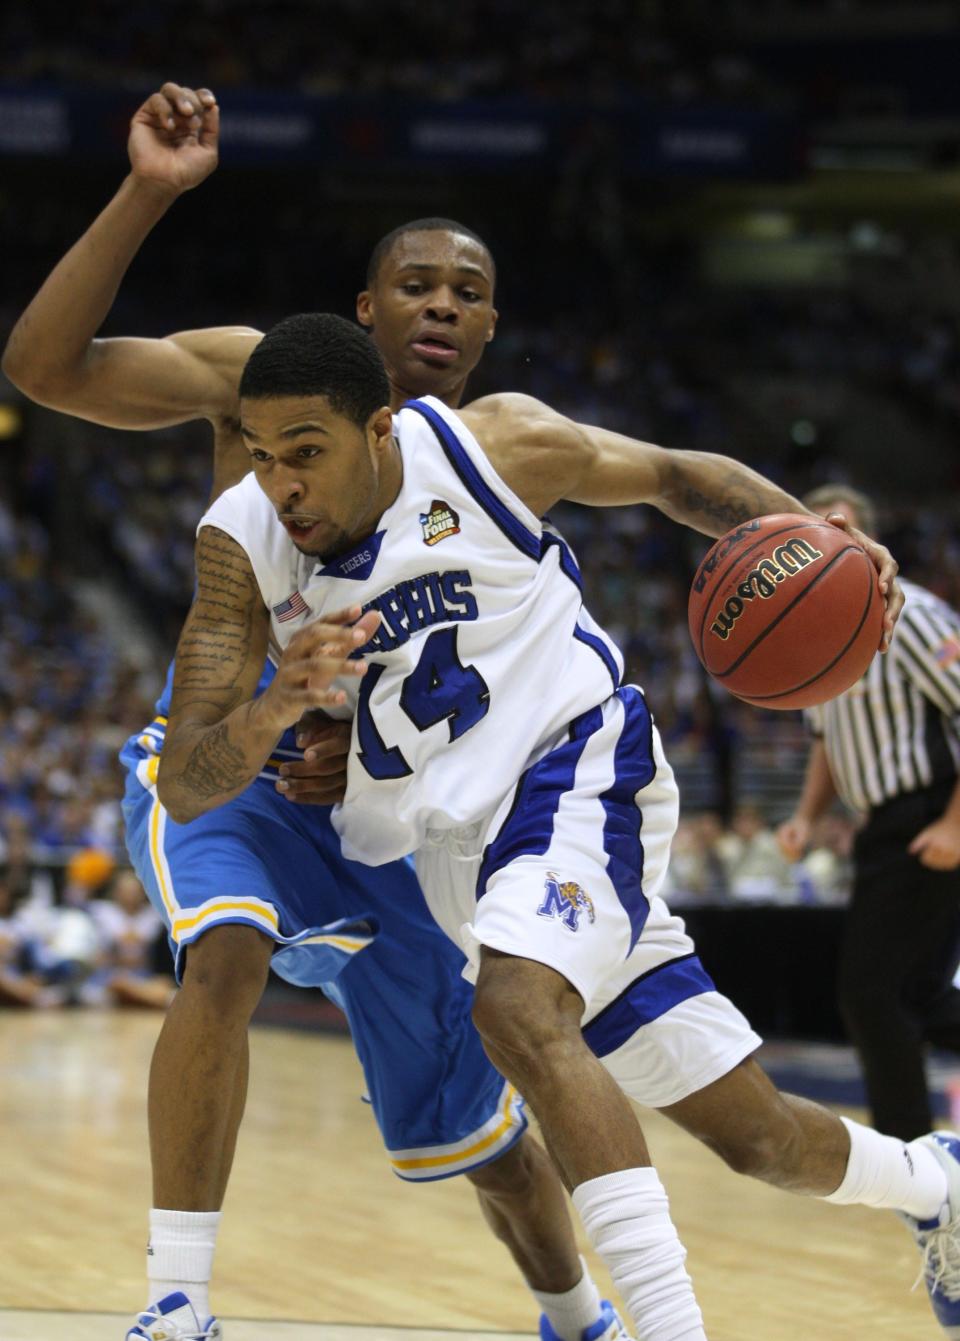 Memphis' Chris Douglas-Roberts, who averaged 28 points a game as a high school junior at Cass Tech, drives against a UCLA defender during second half action during a NCAA Men's Basketball Championship Final Four semifinal game at the Alamodome in San Antonio, Texas, April 5, 2008.